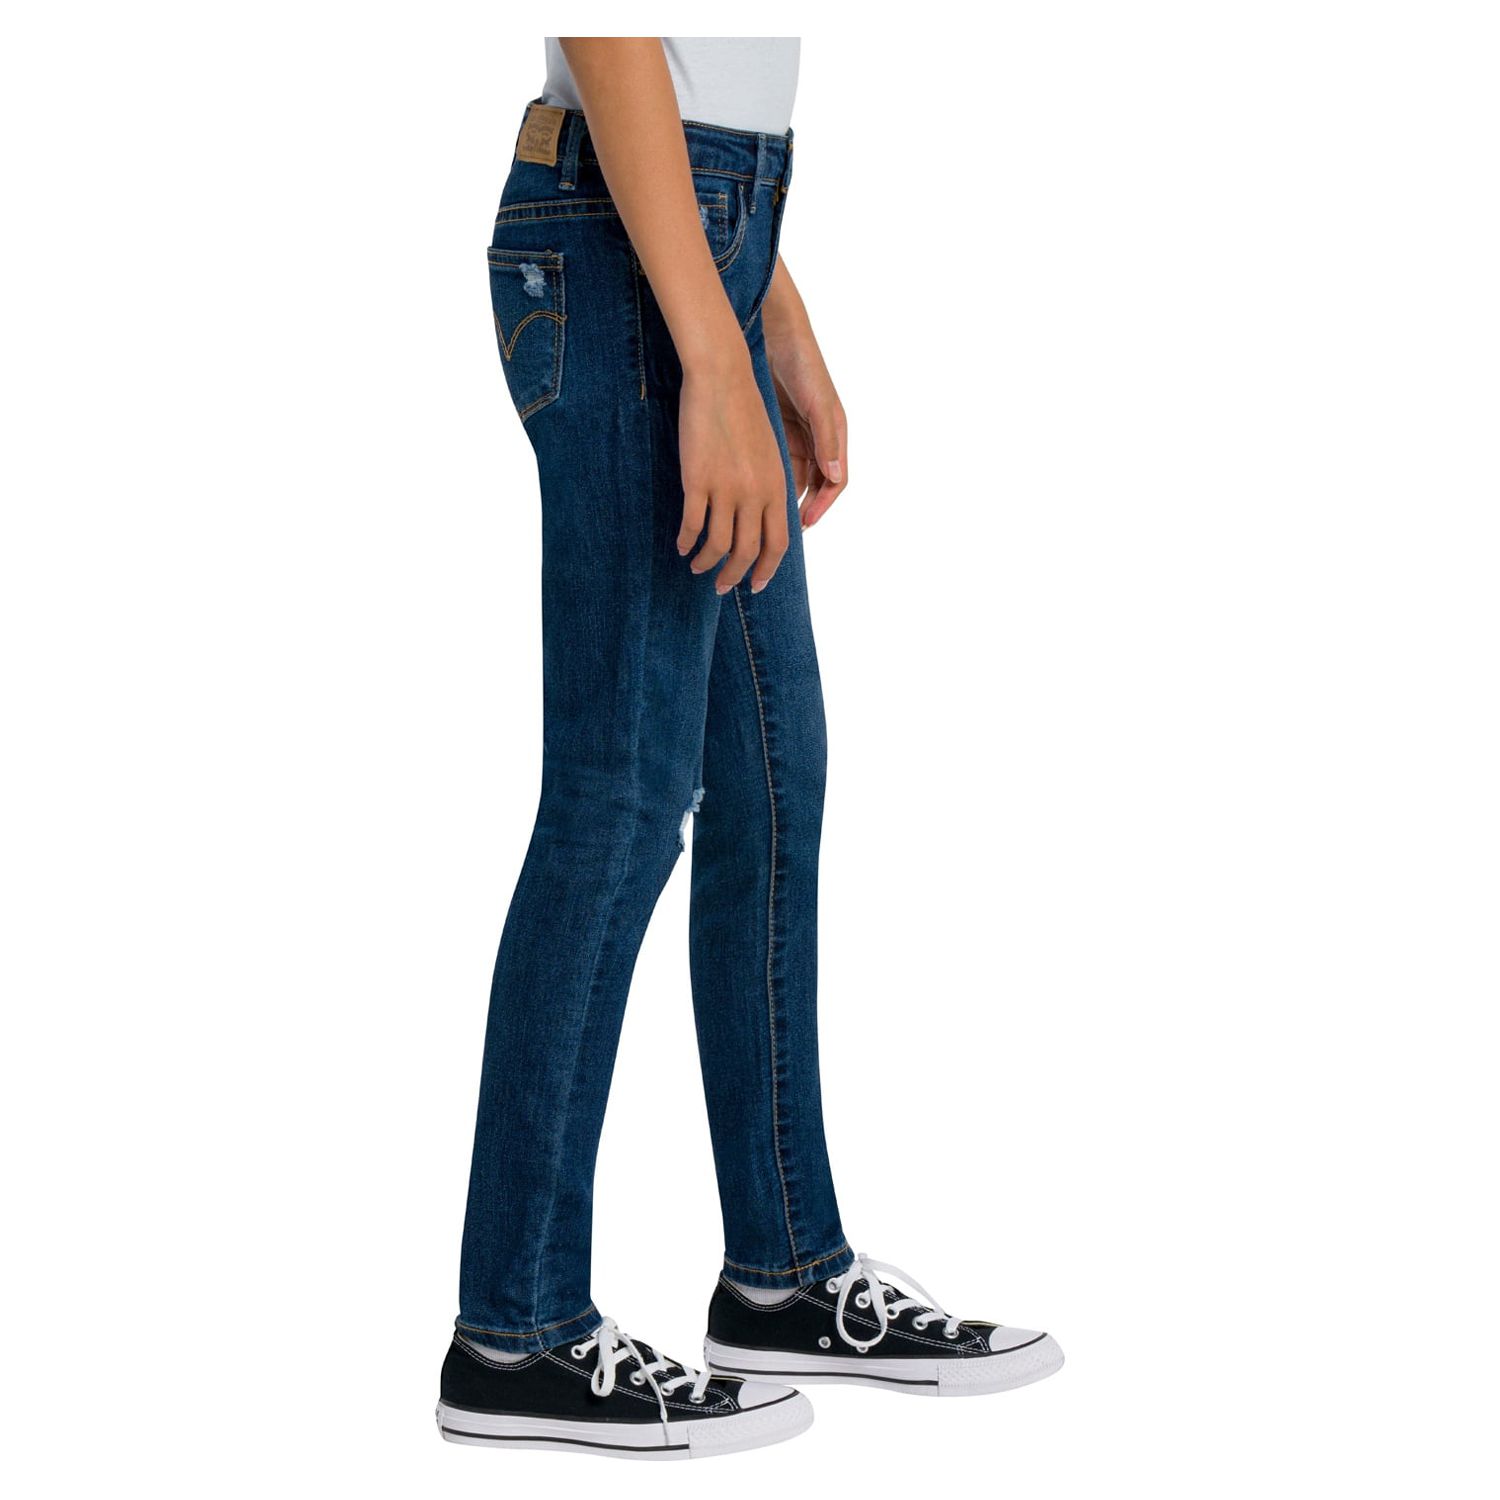 Levi's Girls' 710 Super Skinny Fit Jeans, Sizes 4-16 - image 5 of 6